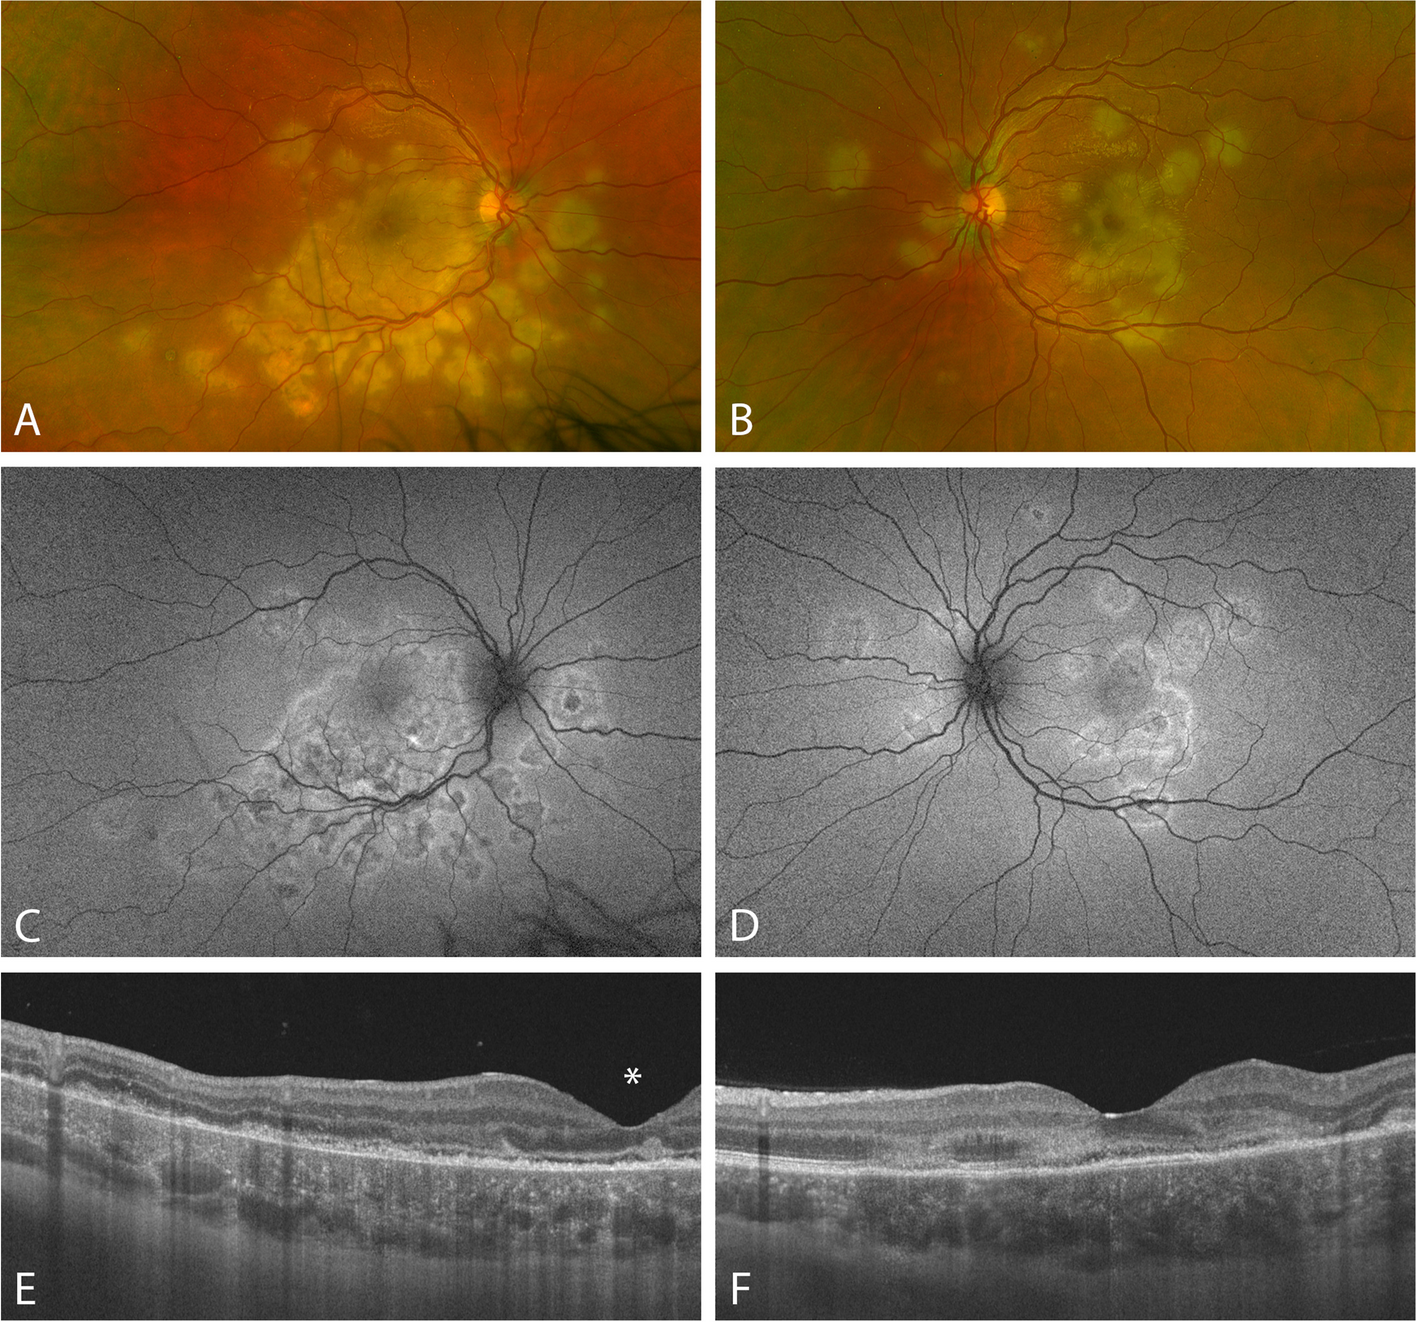 Long-term follow-up of a bilateral acute posterior multifocal placoid pigment epitheliopathy following COVID-19 infection: a case report